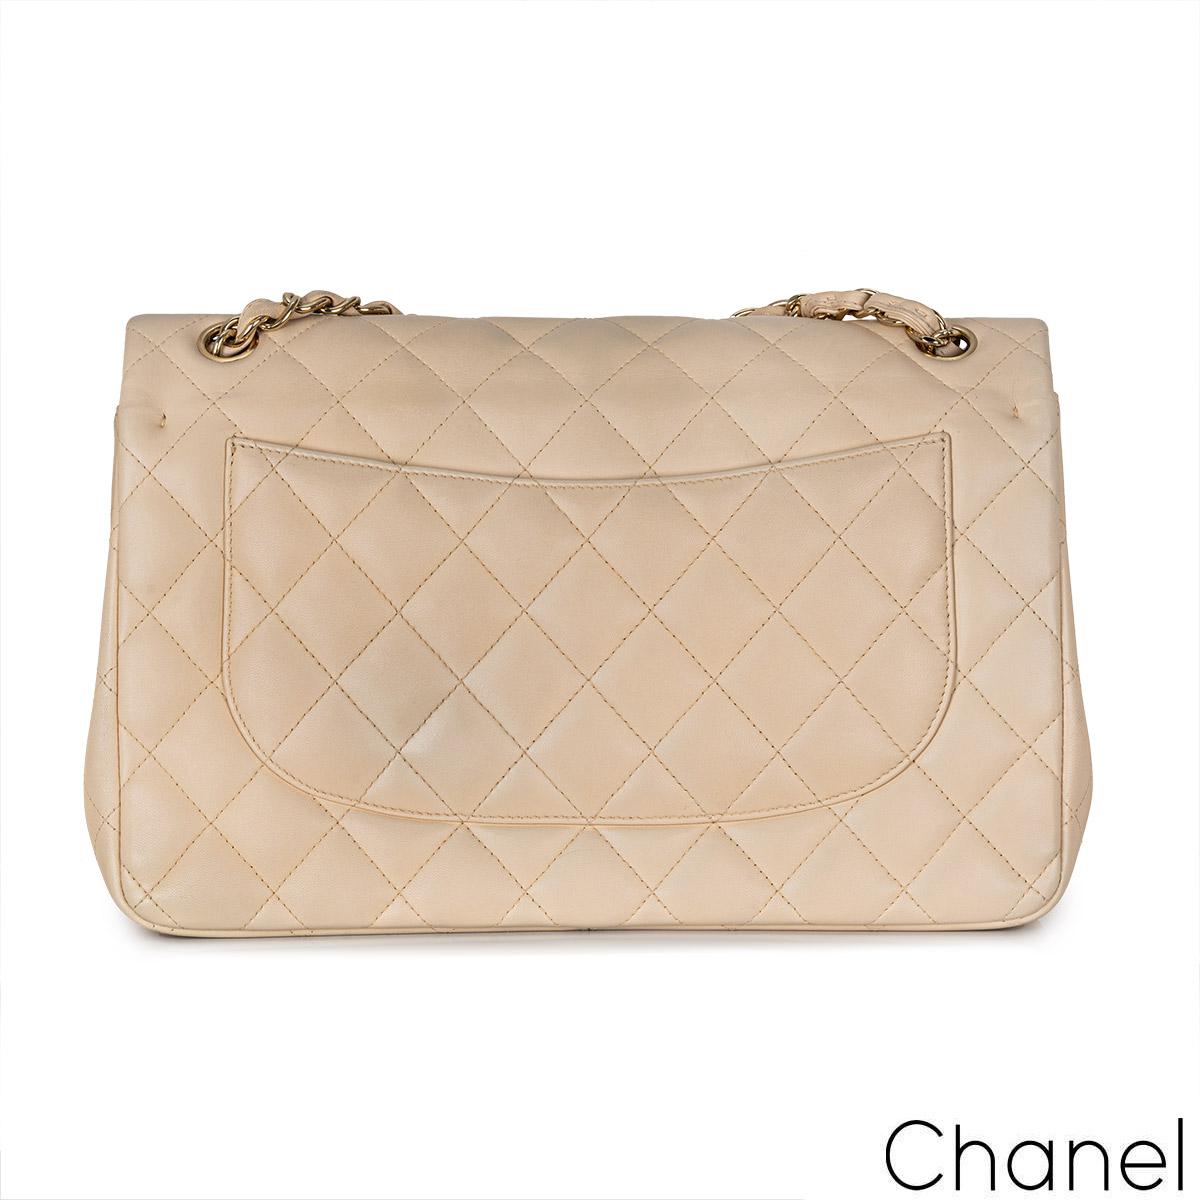 A gorgeous Chanel Jumbo Classic Double Flap Handbag. The exterior of this jumbo classic is in beige lambskin quilted leather with gold-tone hardware. It features a front flap with signature CC turnlock closure, half moon back pocket, and an